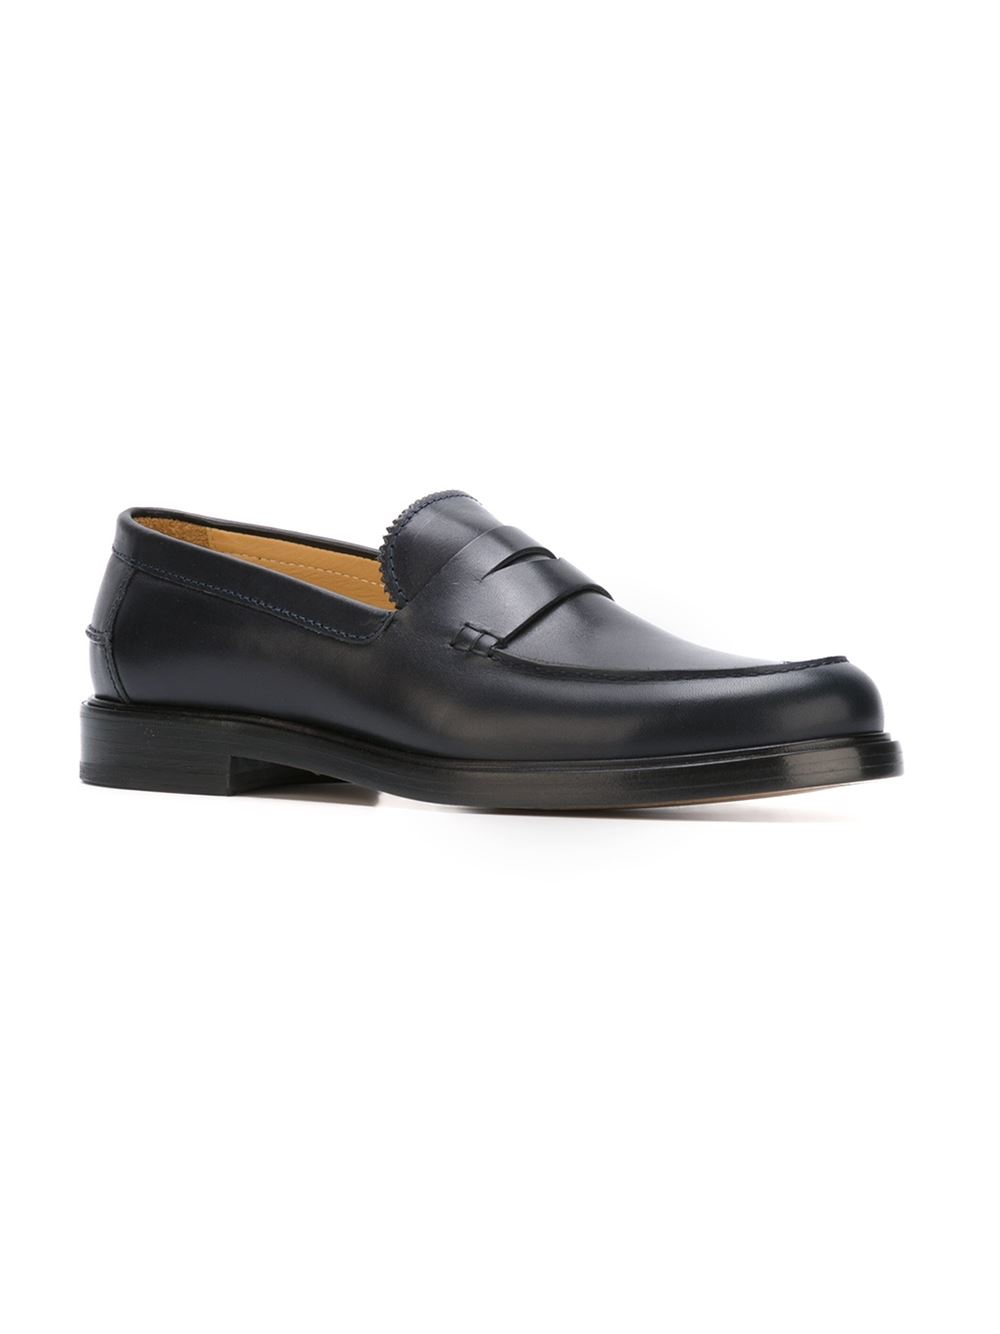 A.P.C. Penny Loafer in for Men